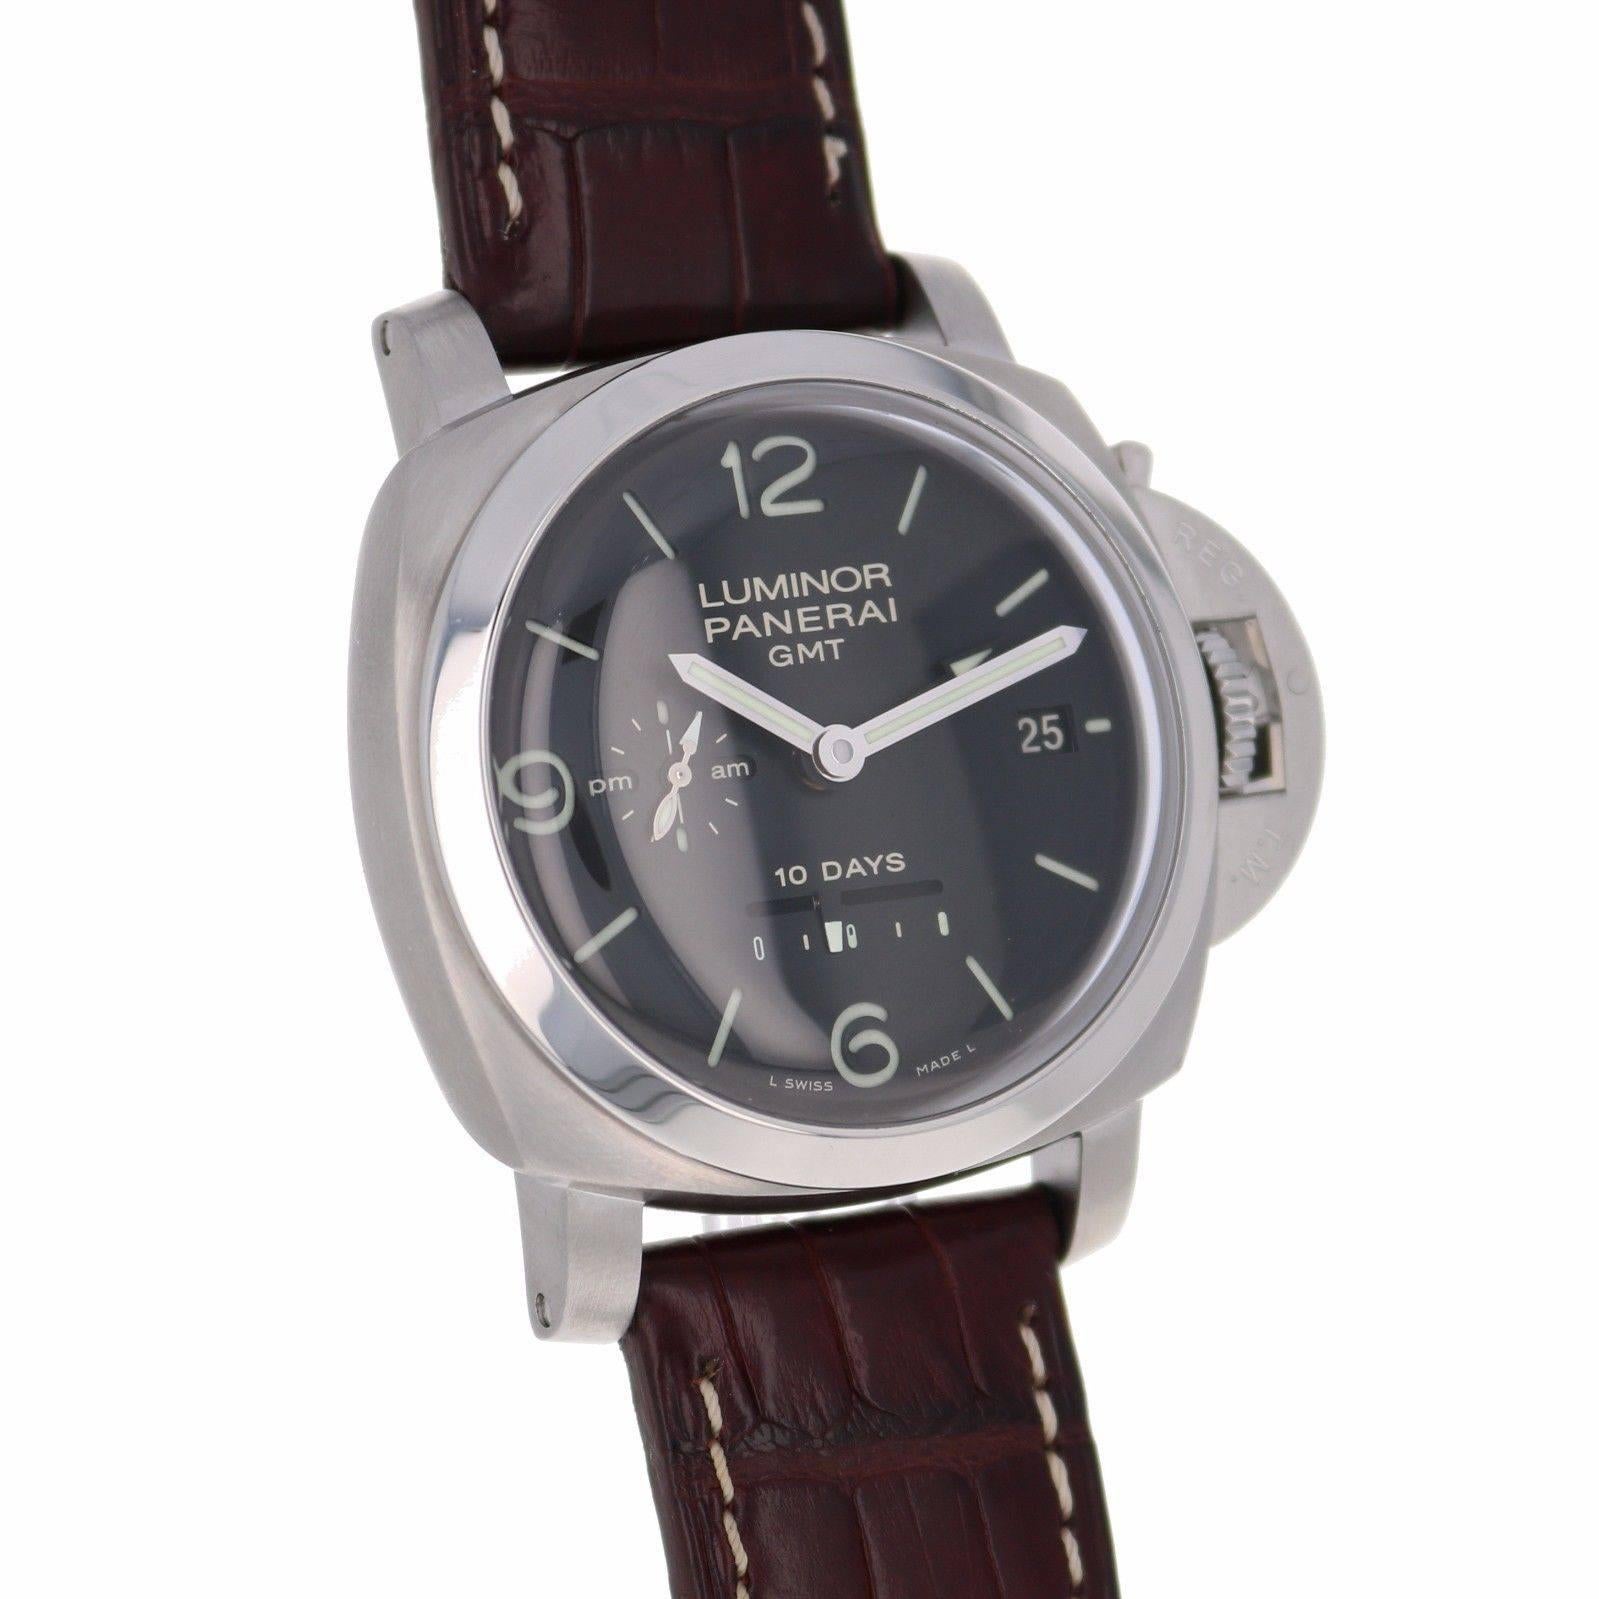 Brand Name  Panerai 
Style Number  PAM 270 
Also Called  PAM00270 
Series  Luminor 1950 10 Days GMT 
Gender  Men's 
Case Material  Stainless Steel 
Dial Color  Black 
Movement  Automatic 
Engine  Panerai Calibre P.92003 in-house movement by Panerai.